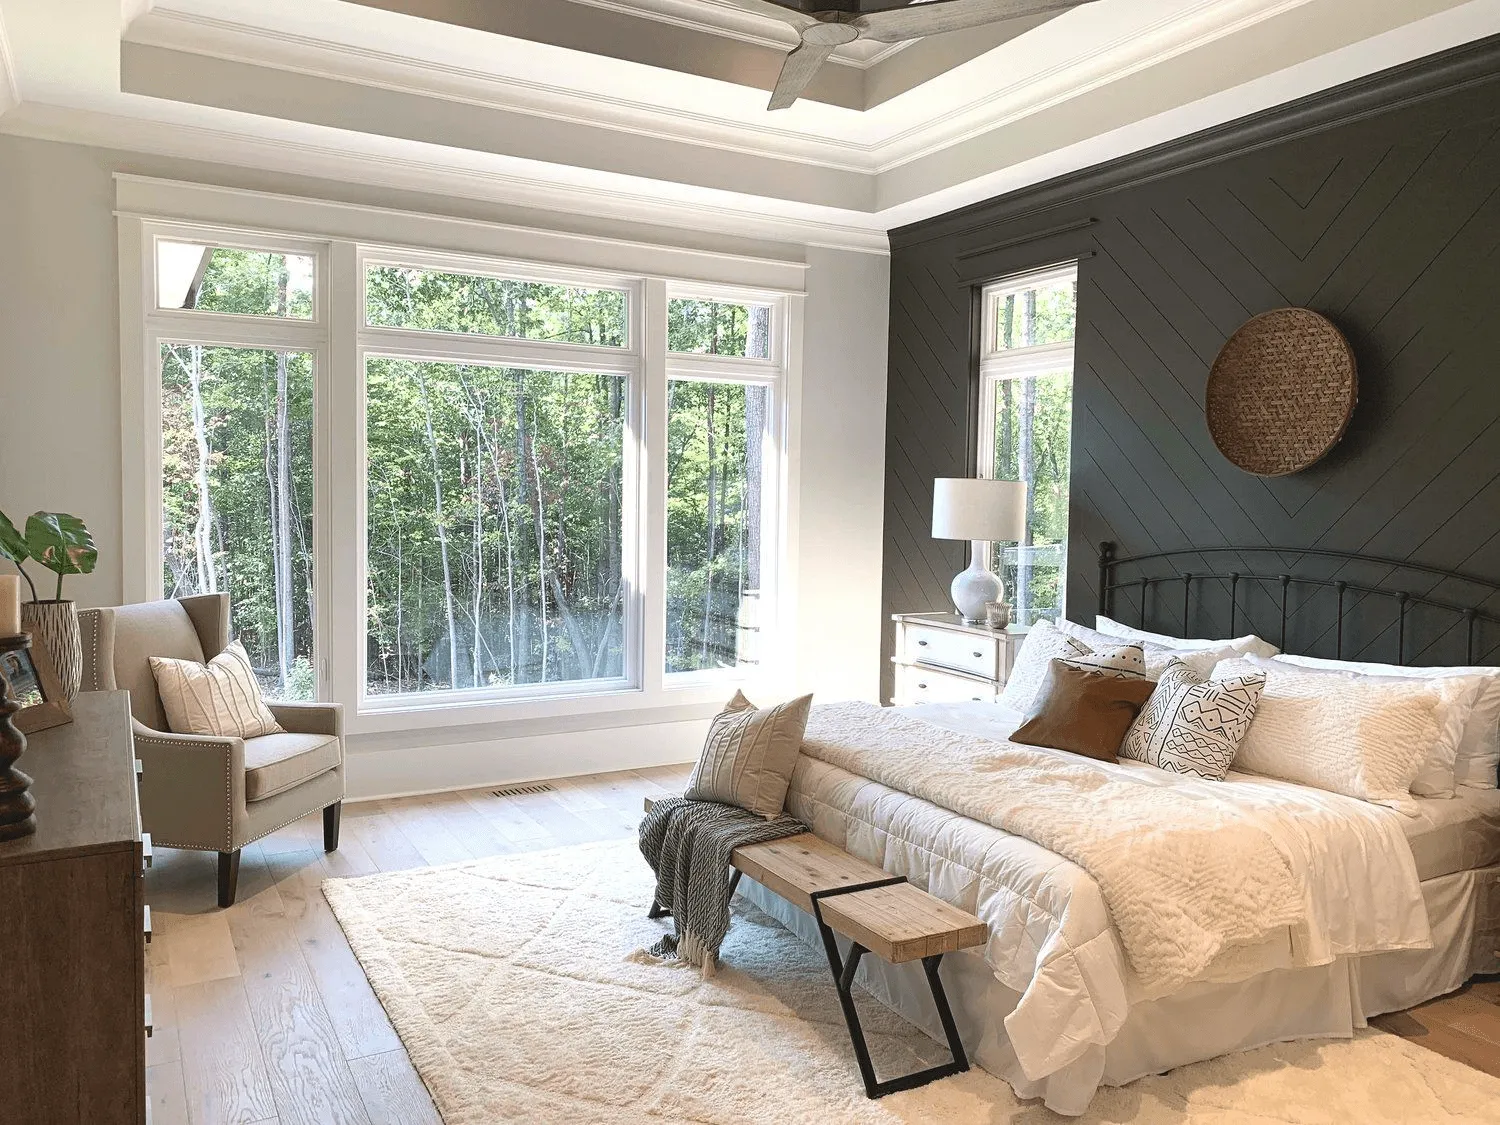 How can Large Windows Enhance Bedroom Living